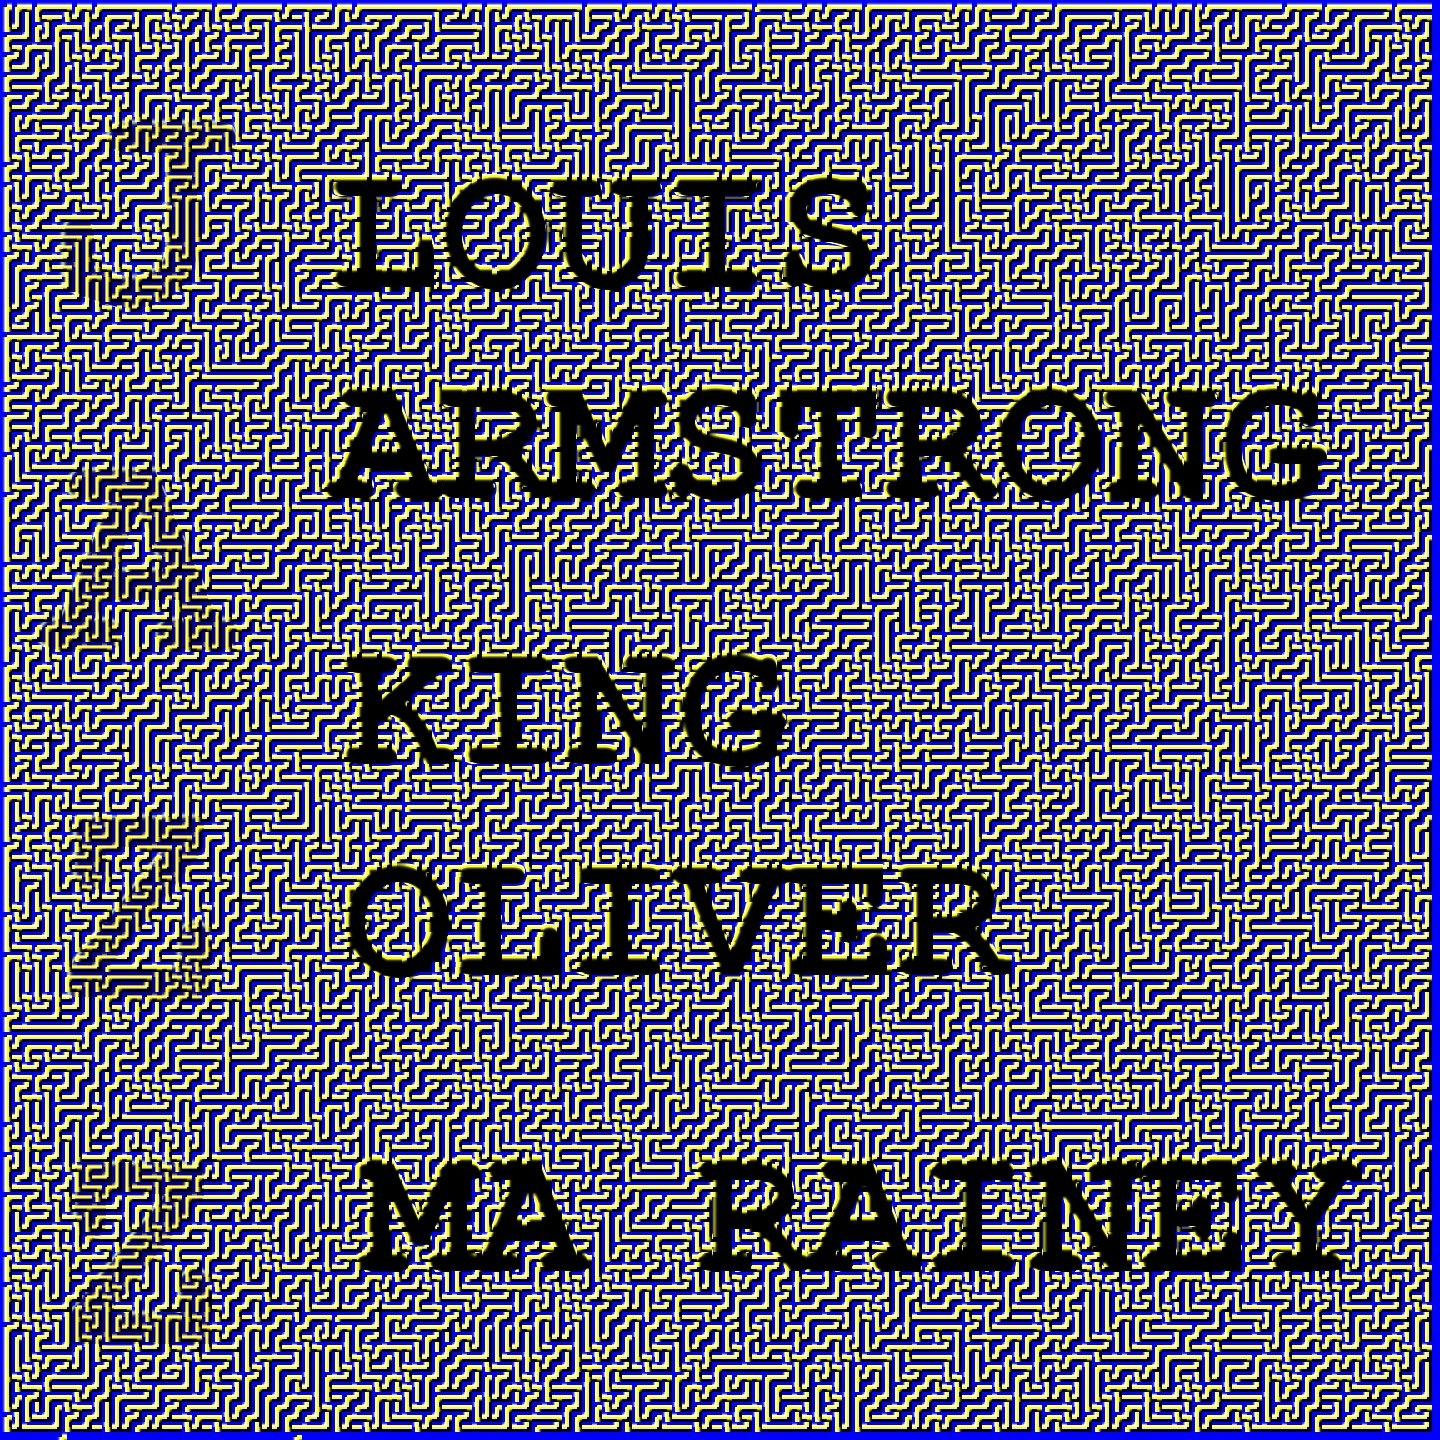 Louis Armstrong, King Oliver and Ma Rainey专辑